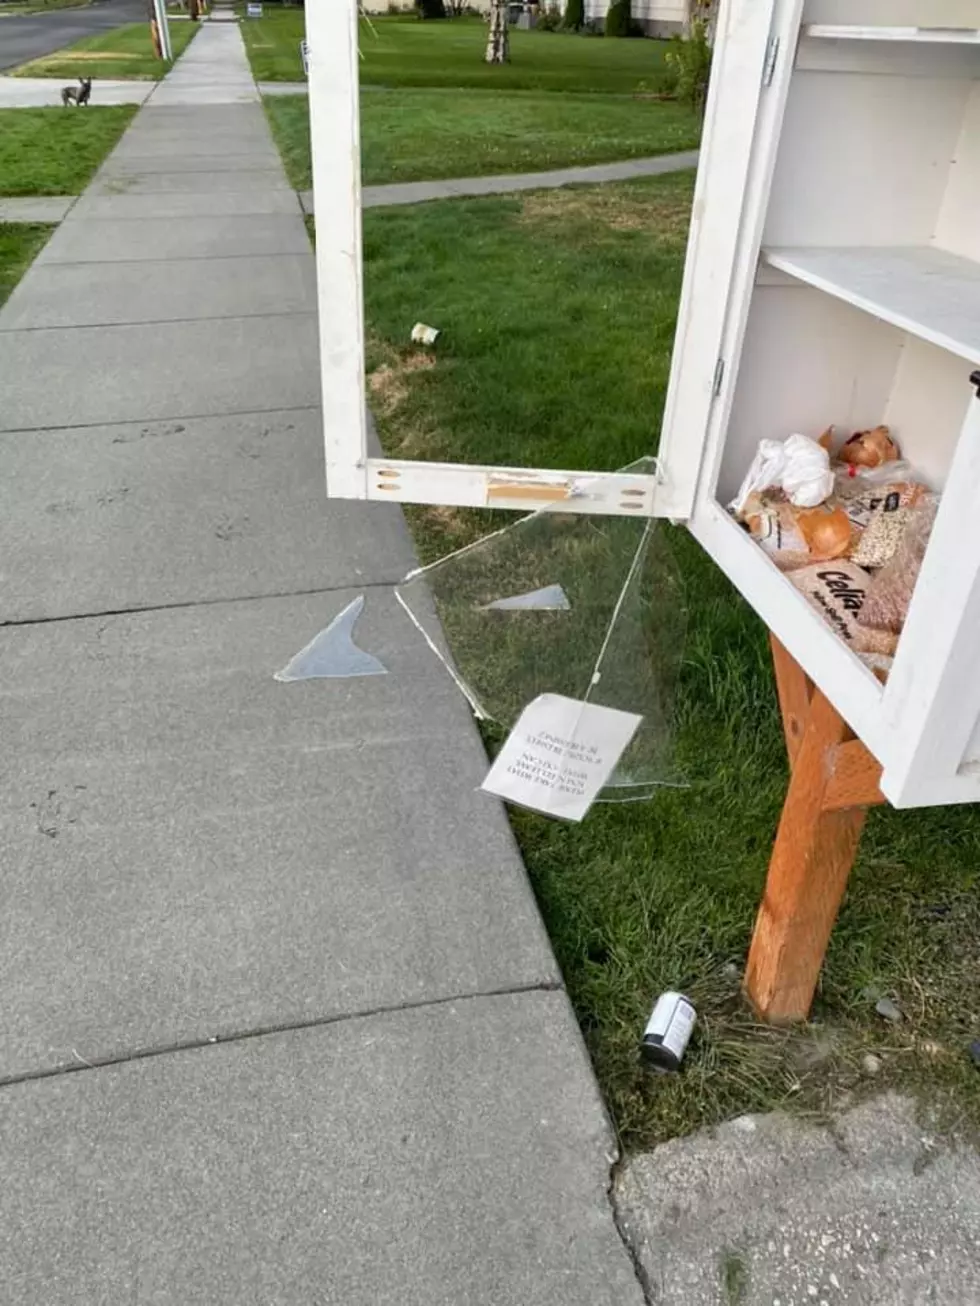 Waitsburg Church’s Blessing Box Is Vandalized…And Then Something Amazing Happens